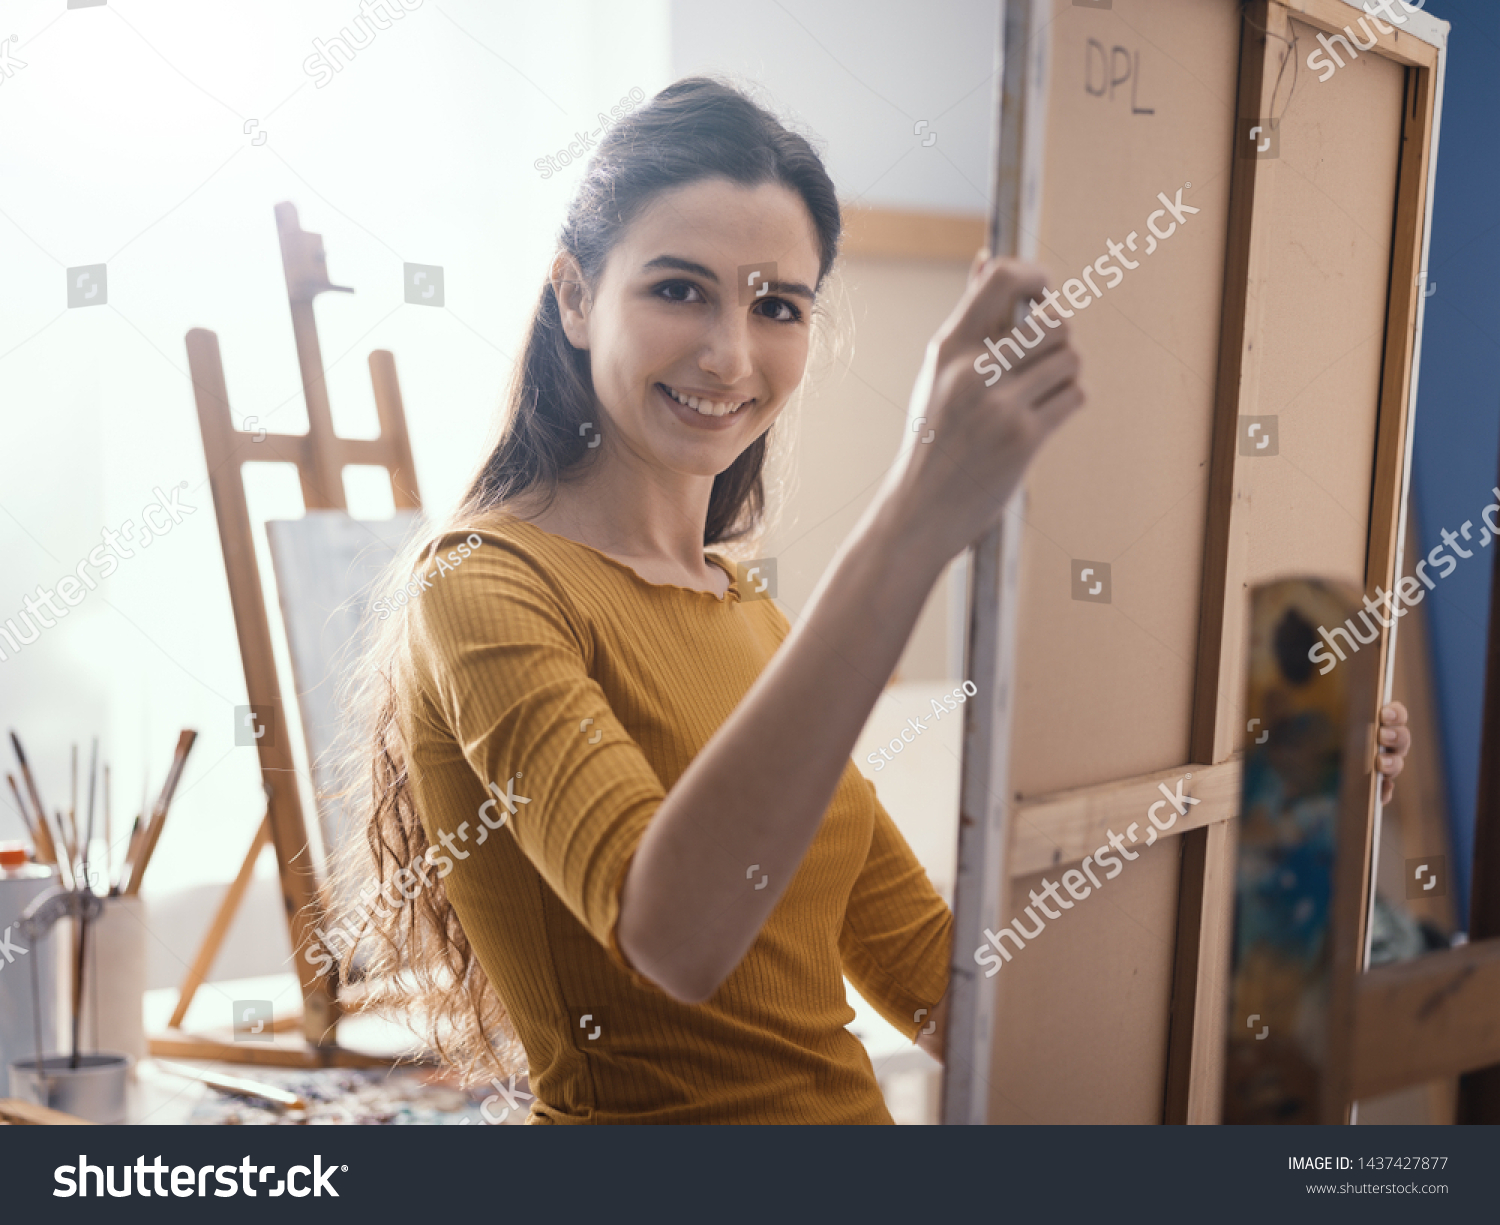 Young Artist Putting Canvas On Easel Royalty Free Stock Image